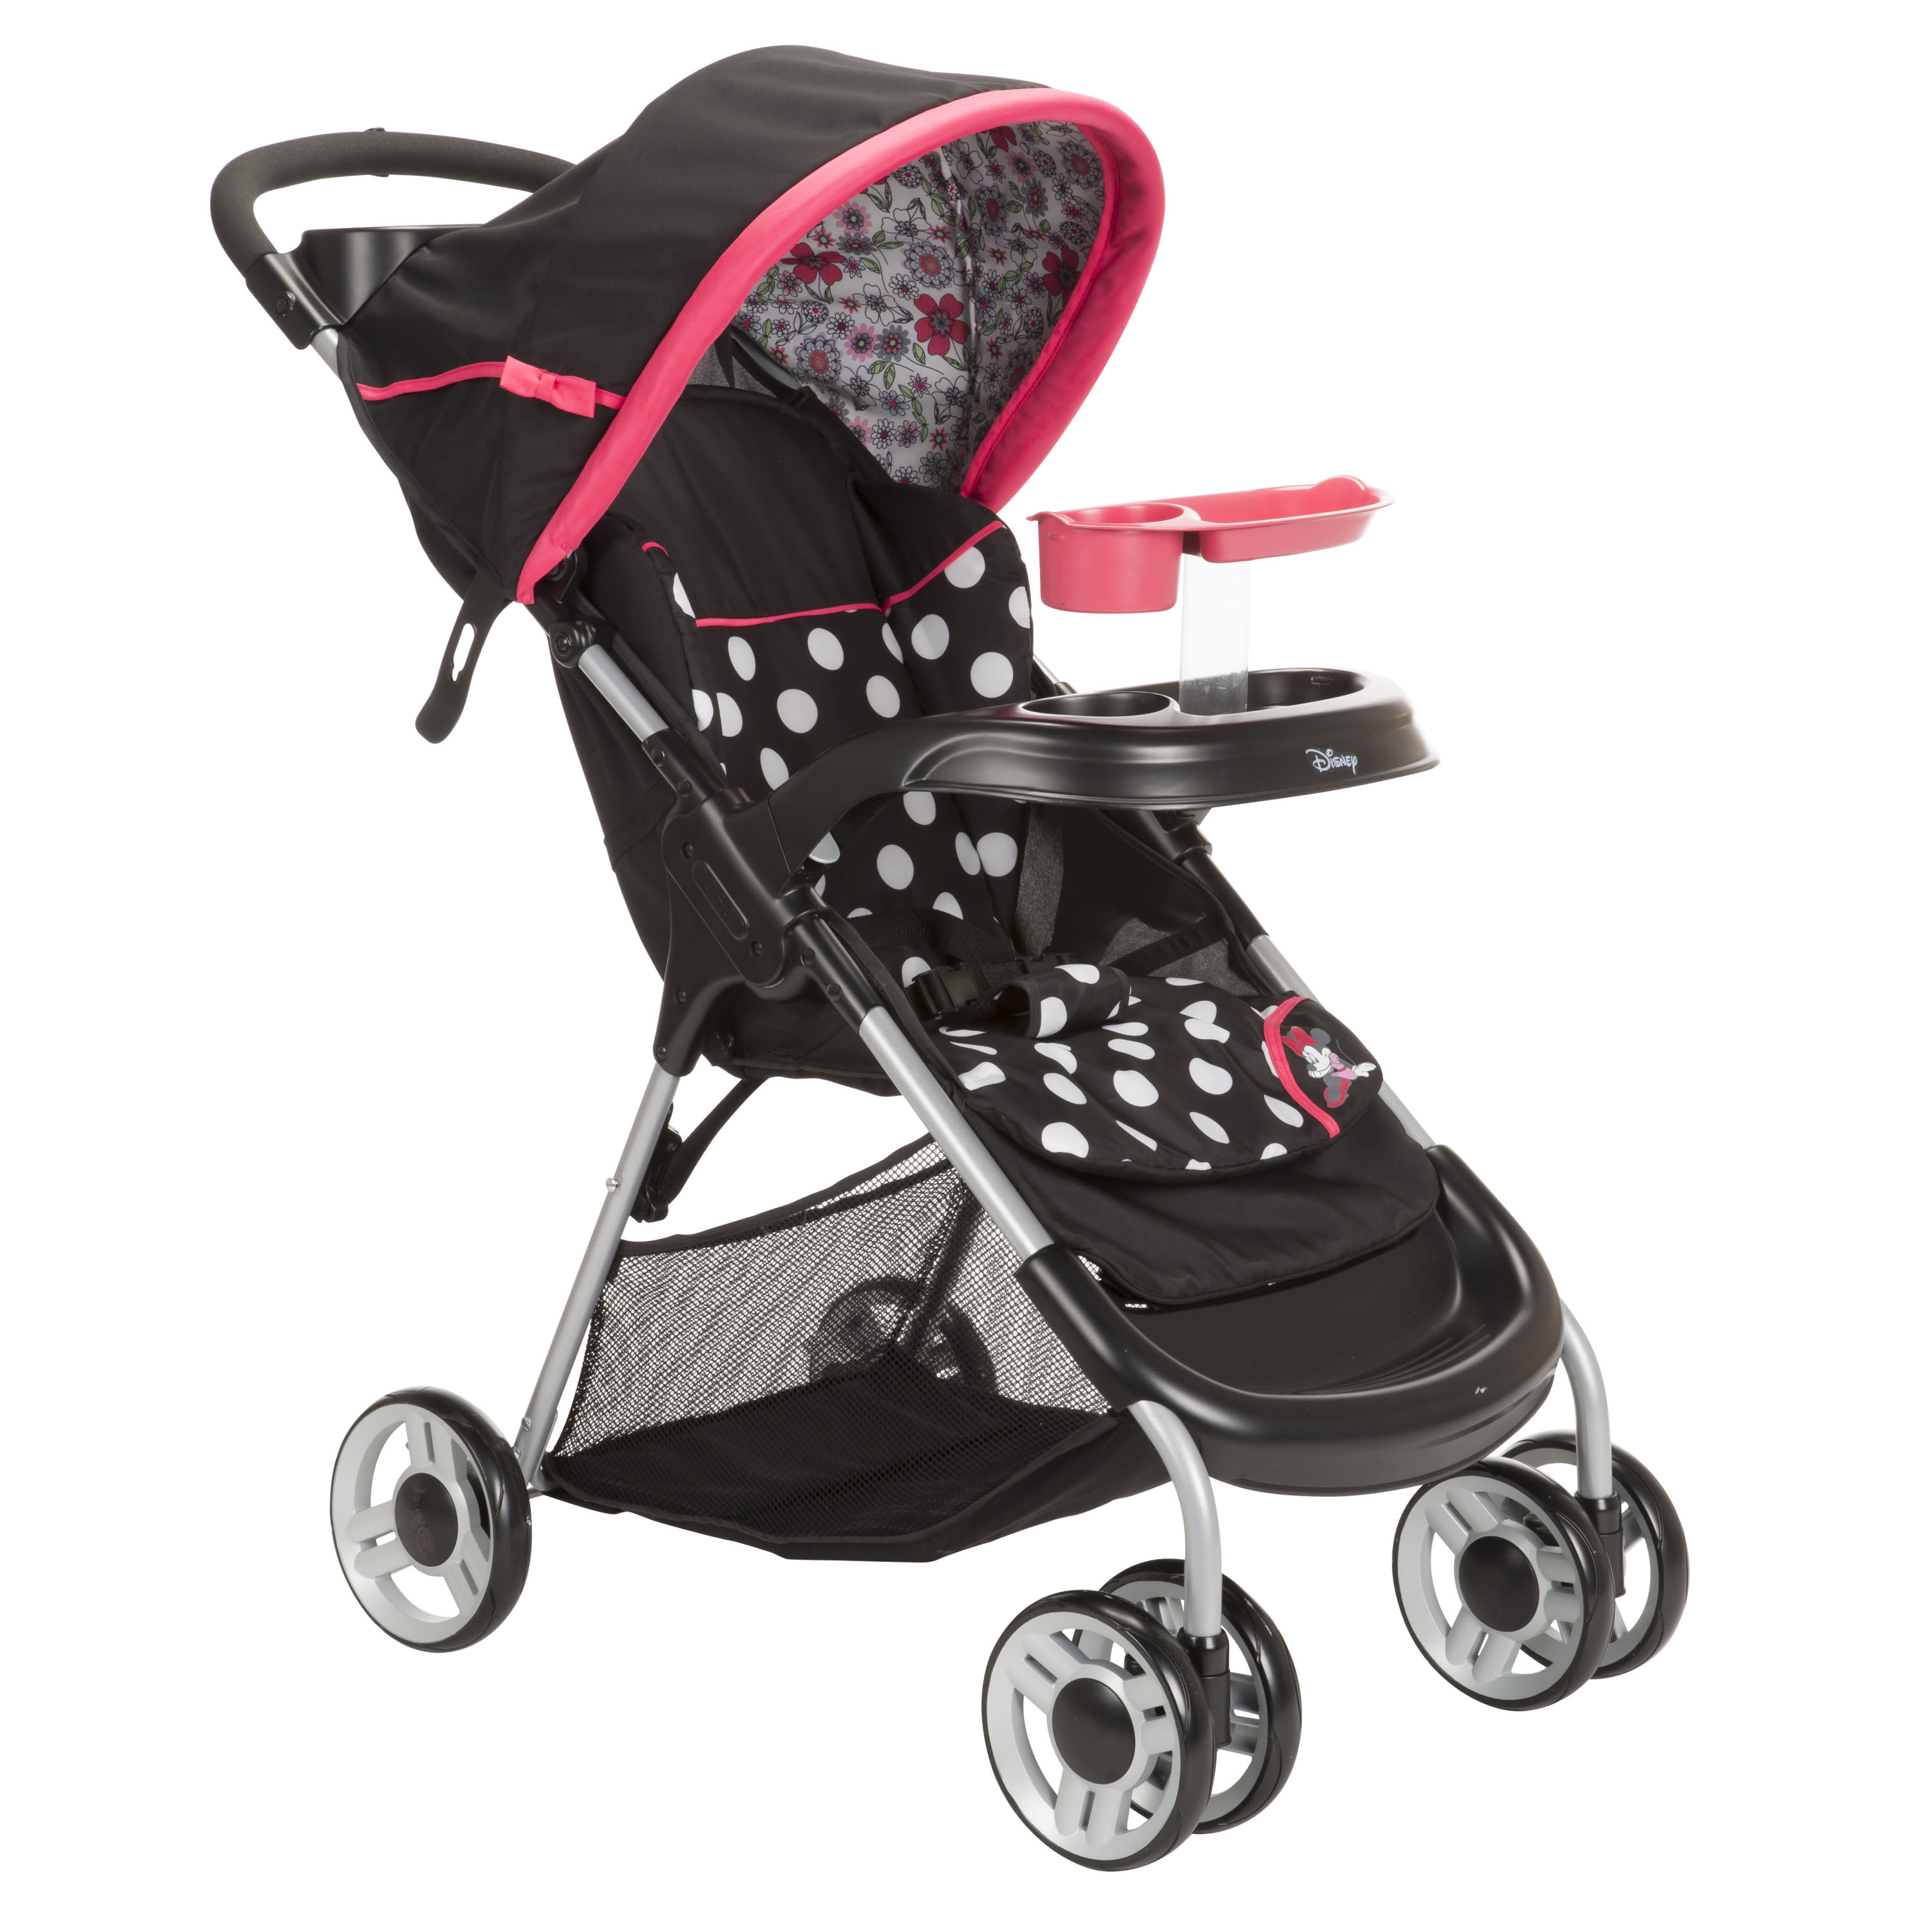 Disney Baby Lift & Stroll Plus Travel System, Minnie Coral Flowers - image 4 of 18